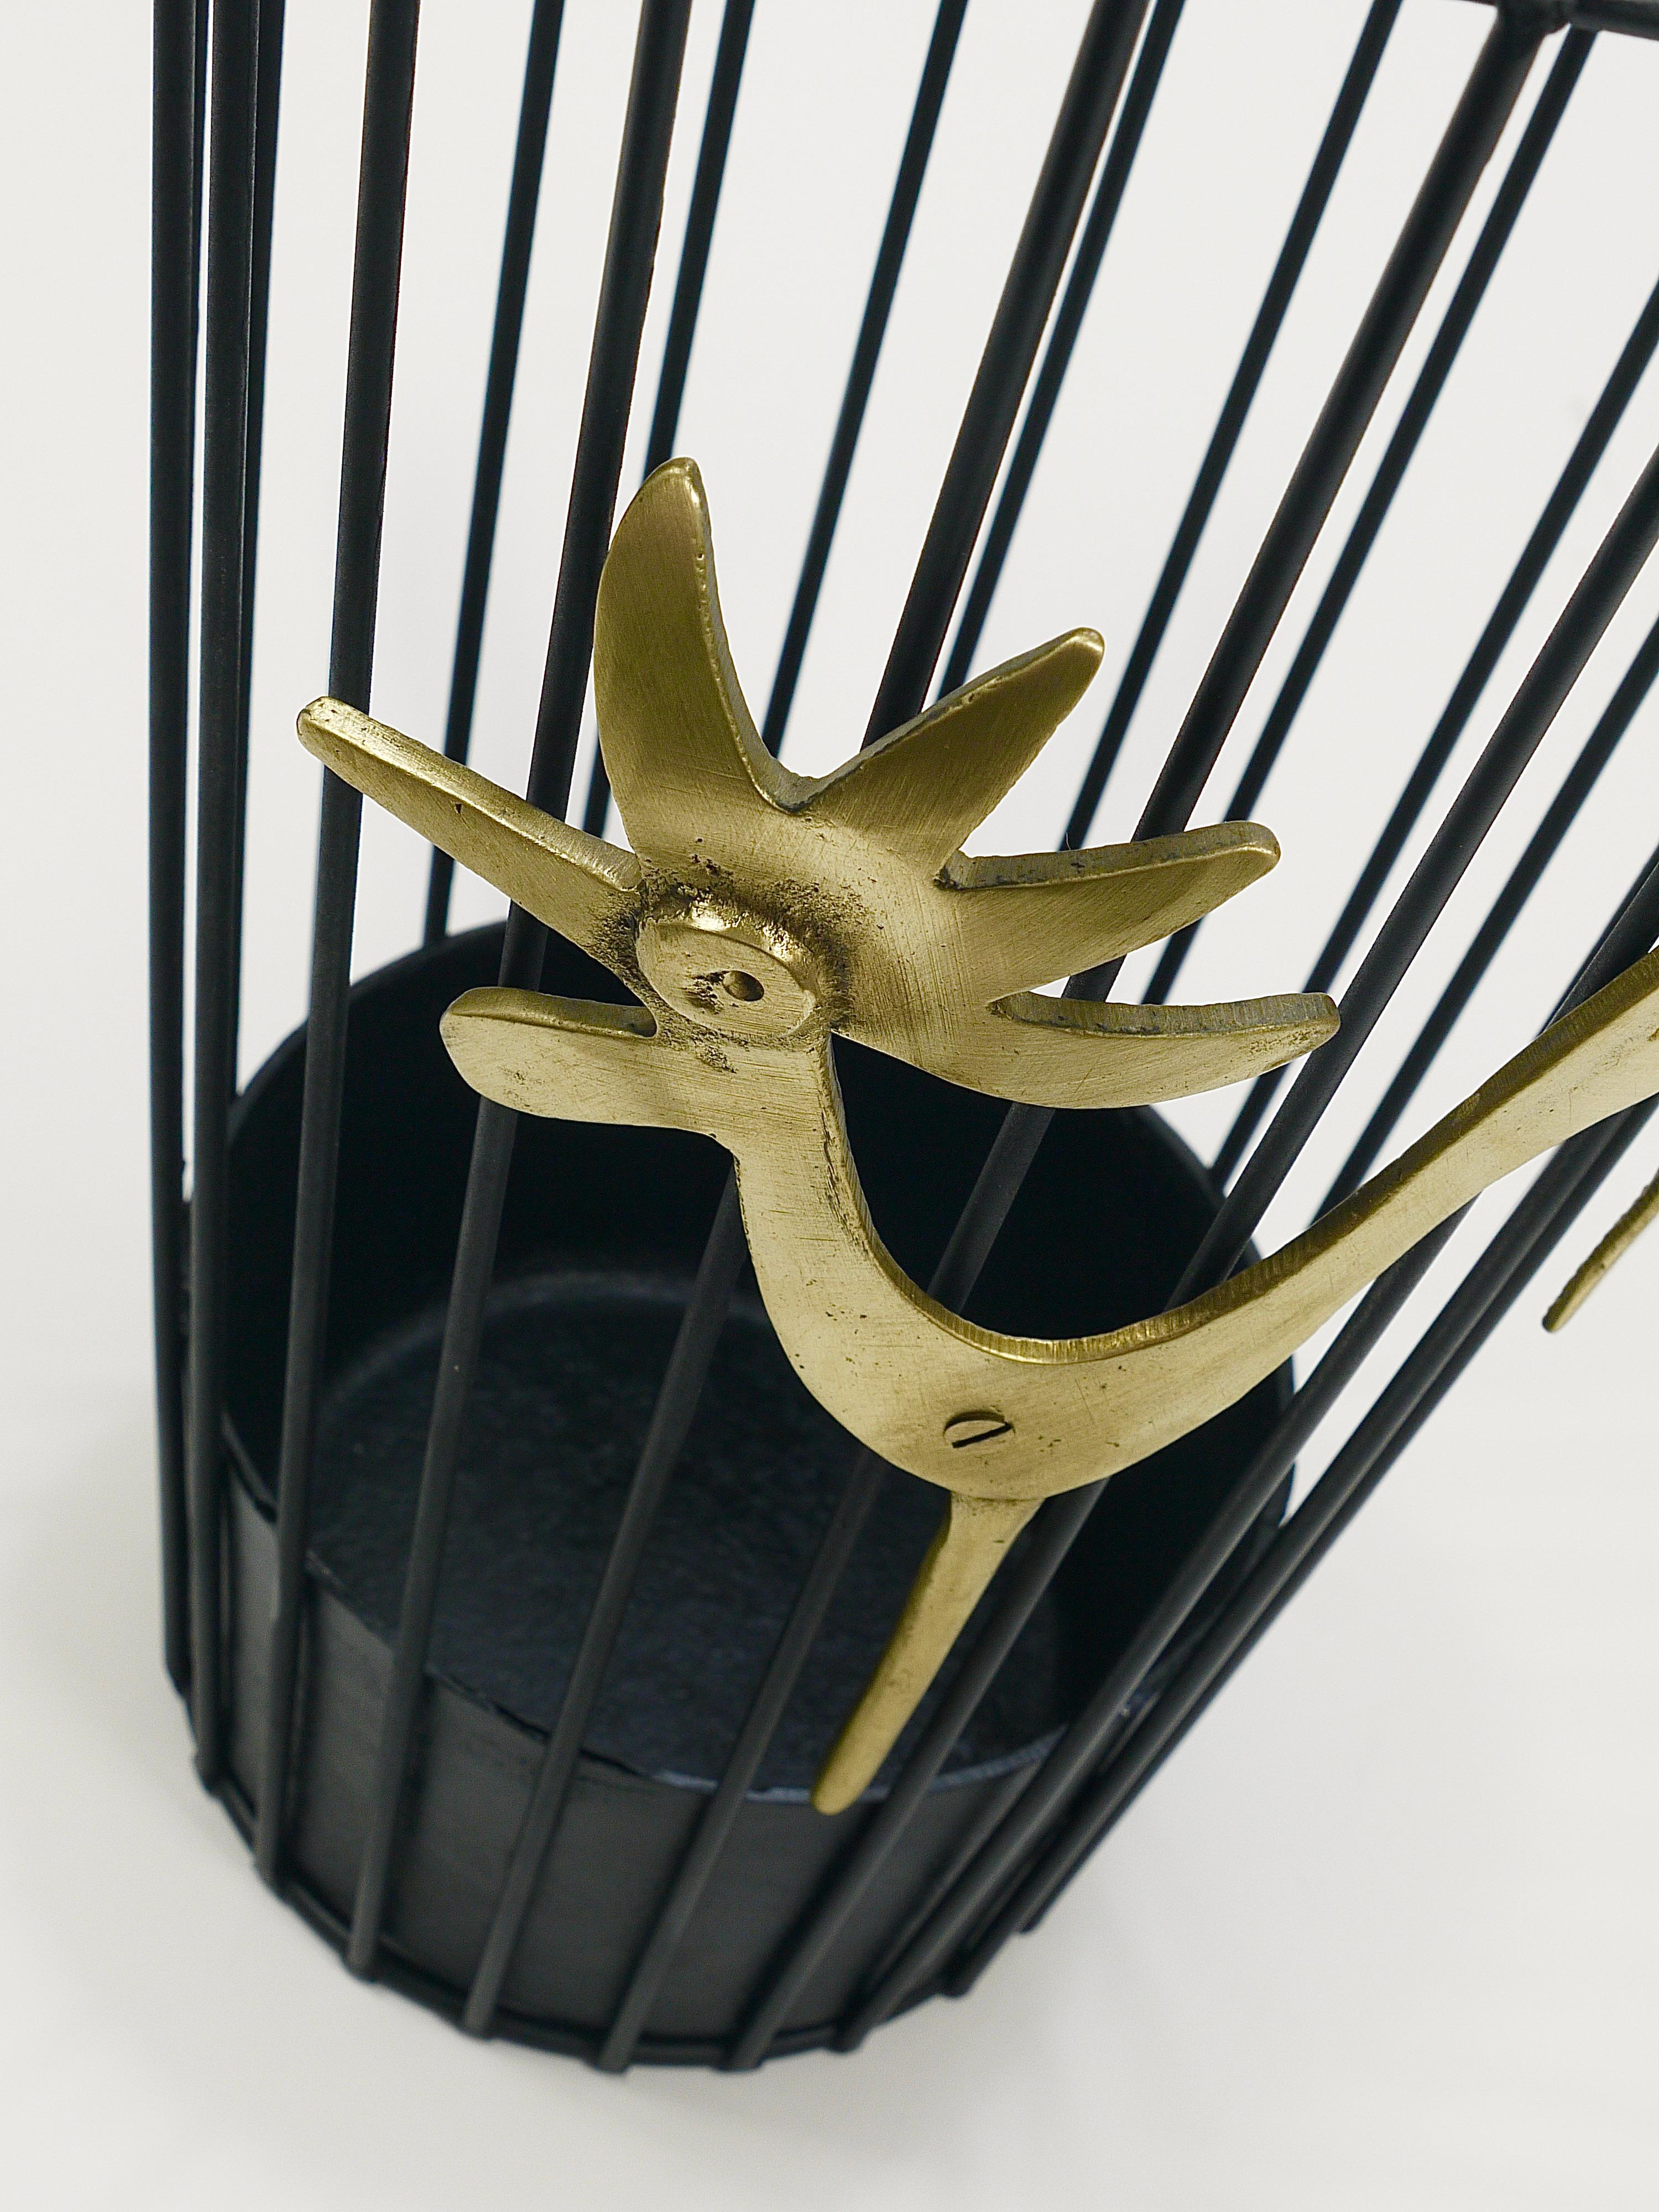 Metal Walter Bosse Brass Rooster Mid-Century Umbrella Stand for Herta Baller, 1950s For Sale